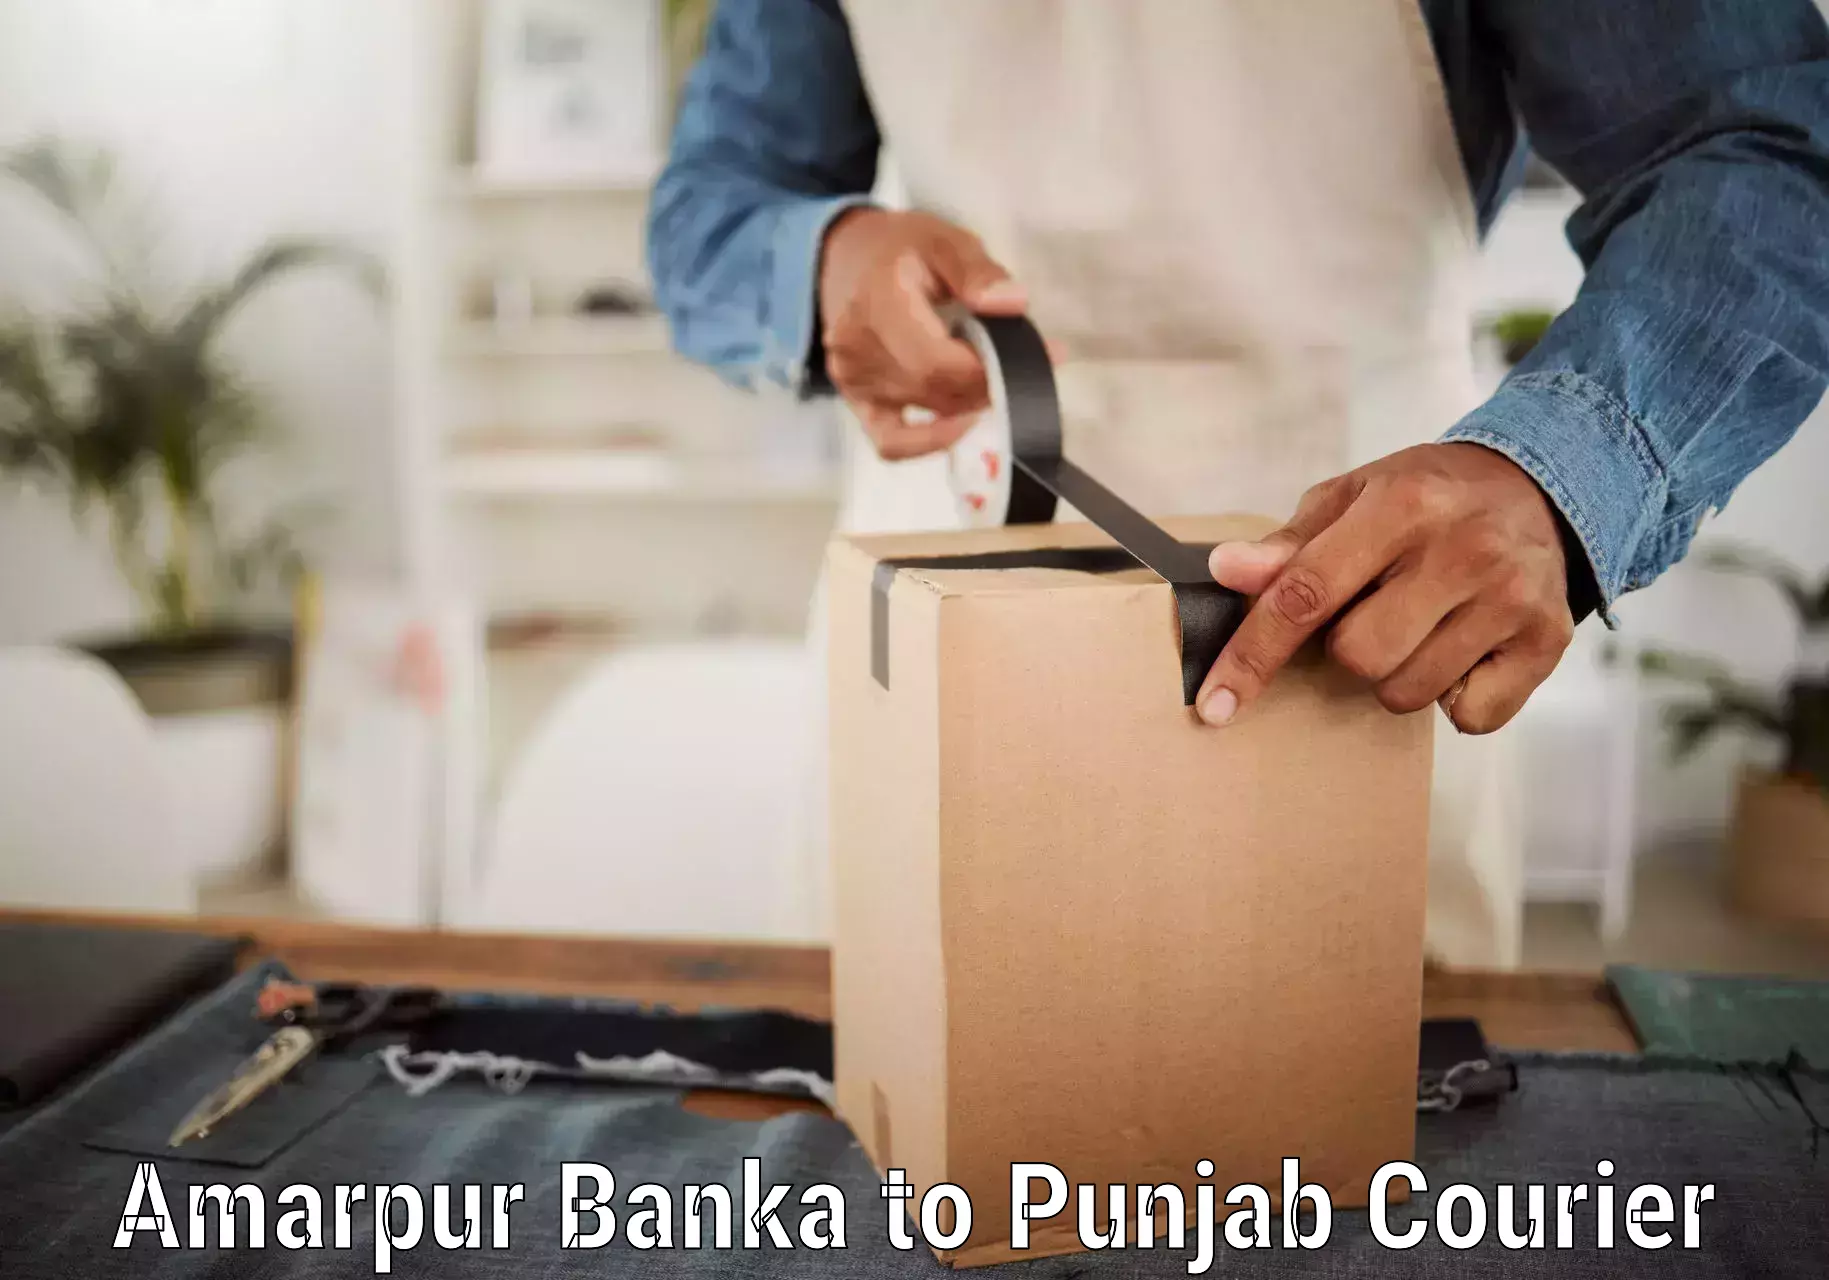 Customer-oriented courier services Amarpur Banka to Punjab